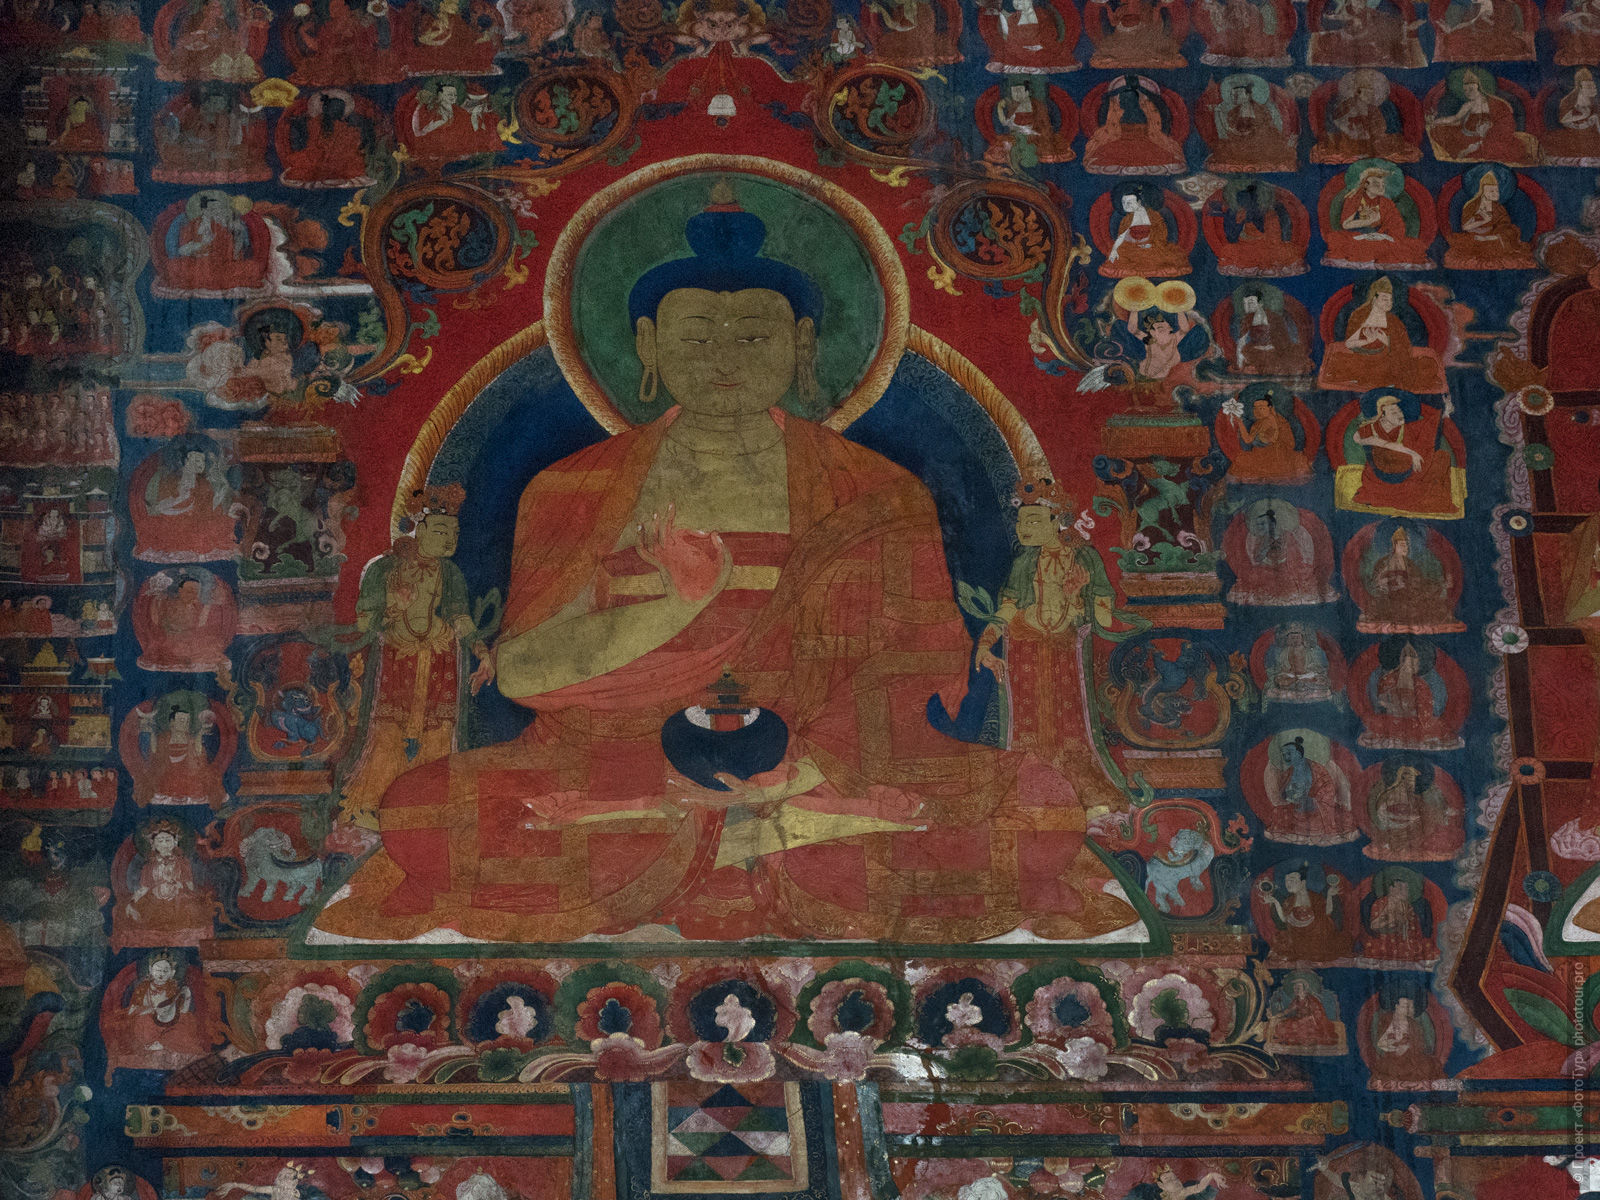 Ancient paintings in the Buddhist monastery of Basgo, Ladakh womens tour, August 31 - September 14, 2019.